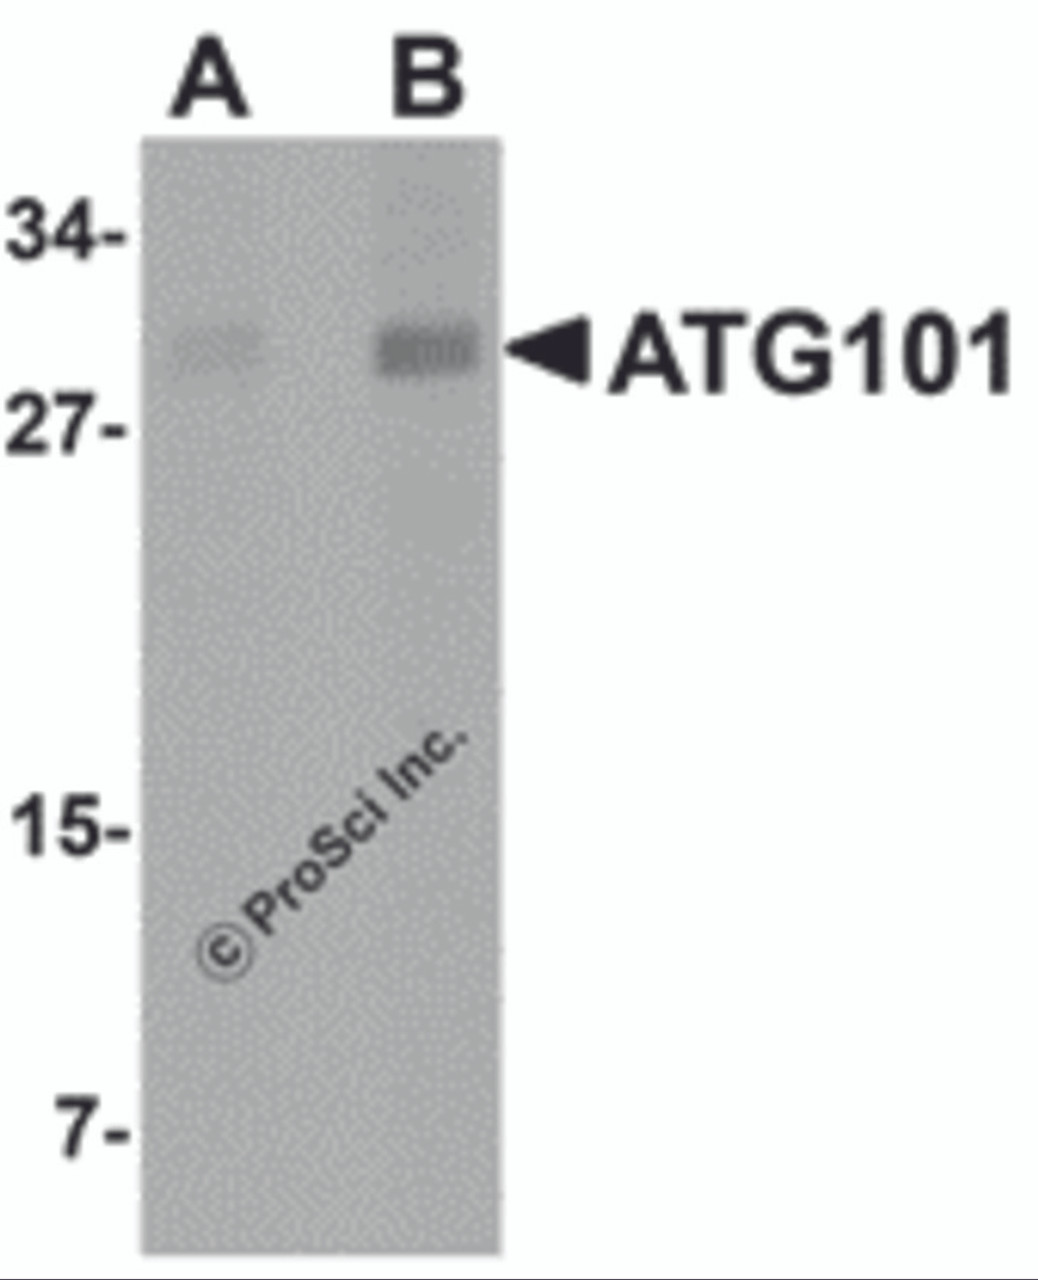 Western blot analysis of ATG101 in human liver tissue lysate with ATG101 antibody at (A) 1 and (B) 2 &#956;g/mL.